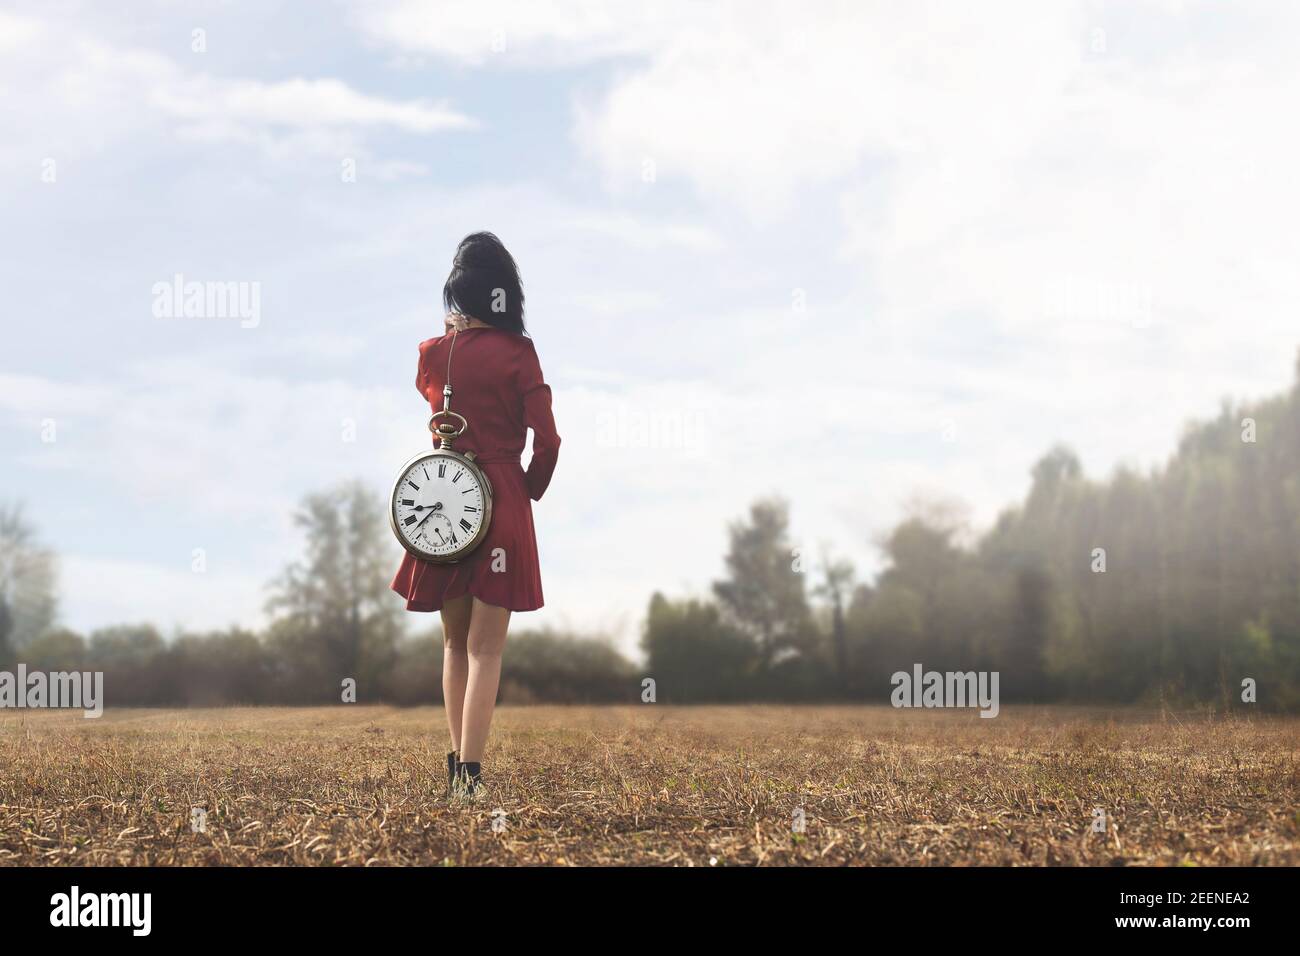 surreal moment of a woman who is walking towards her destiny with the weight of time passing Stock Photo